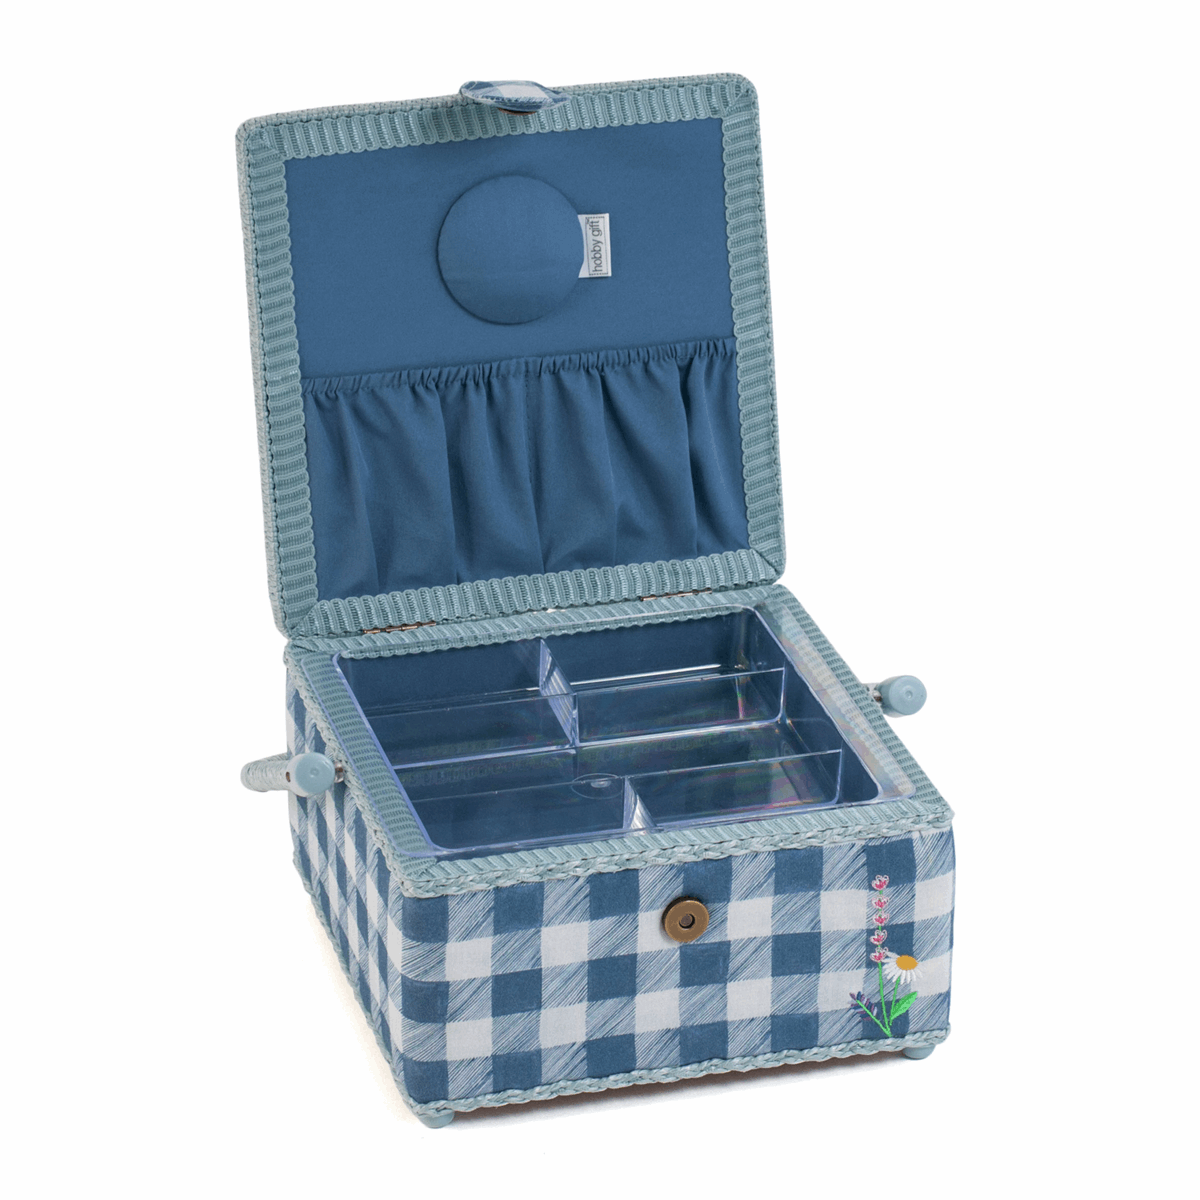 Wild Floral Plaid Square Embroidered Lid Sewing Box - Medium